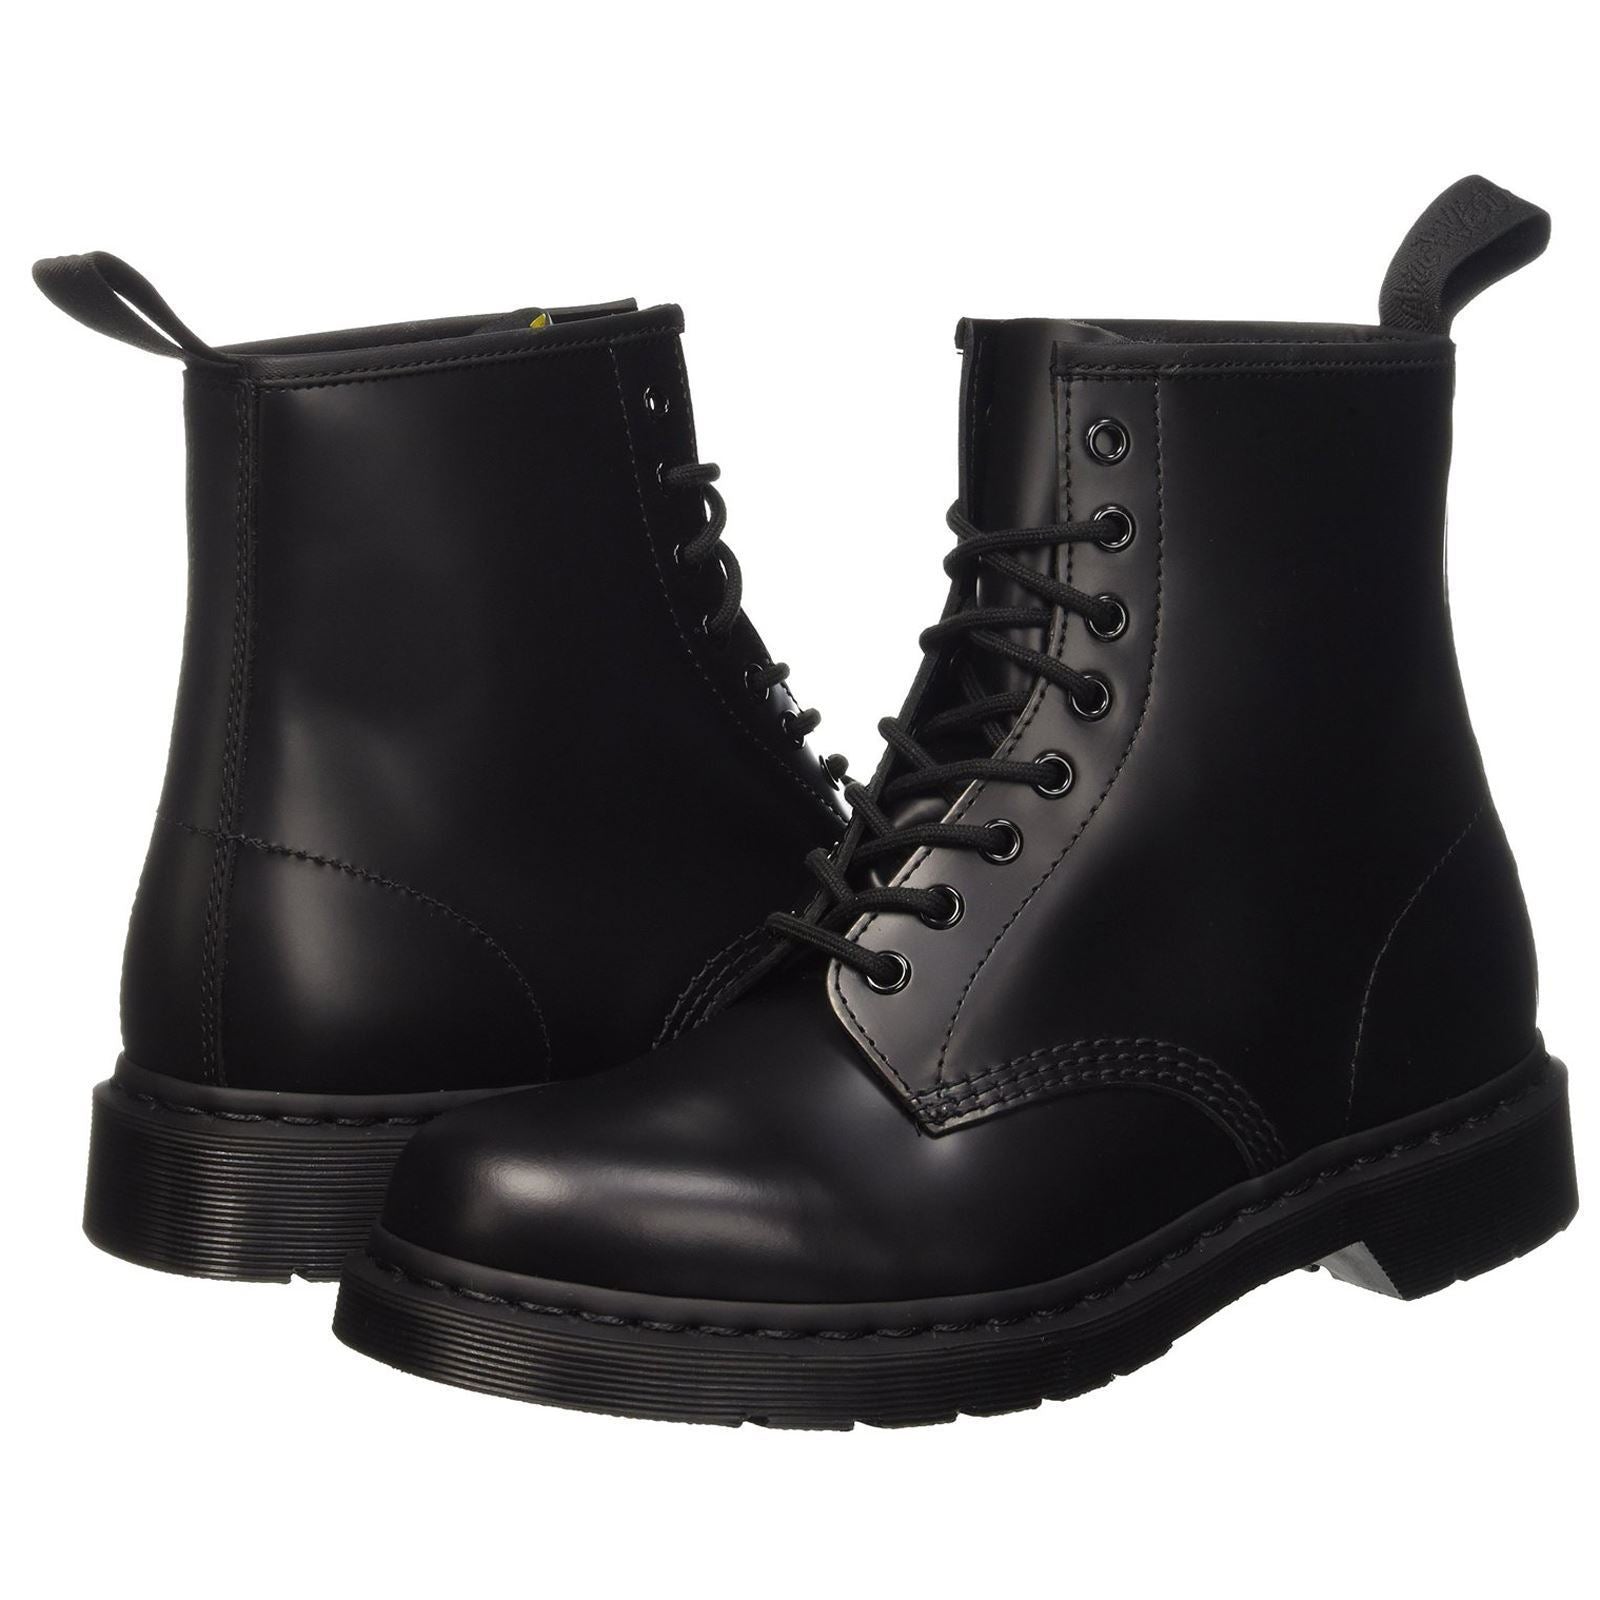 Dr. Martens 1460 Mono Smooth Leather Unisex Ankle Boots